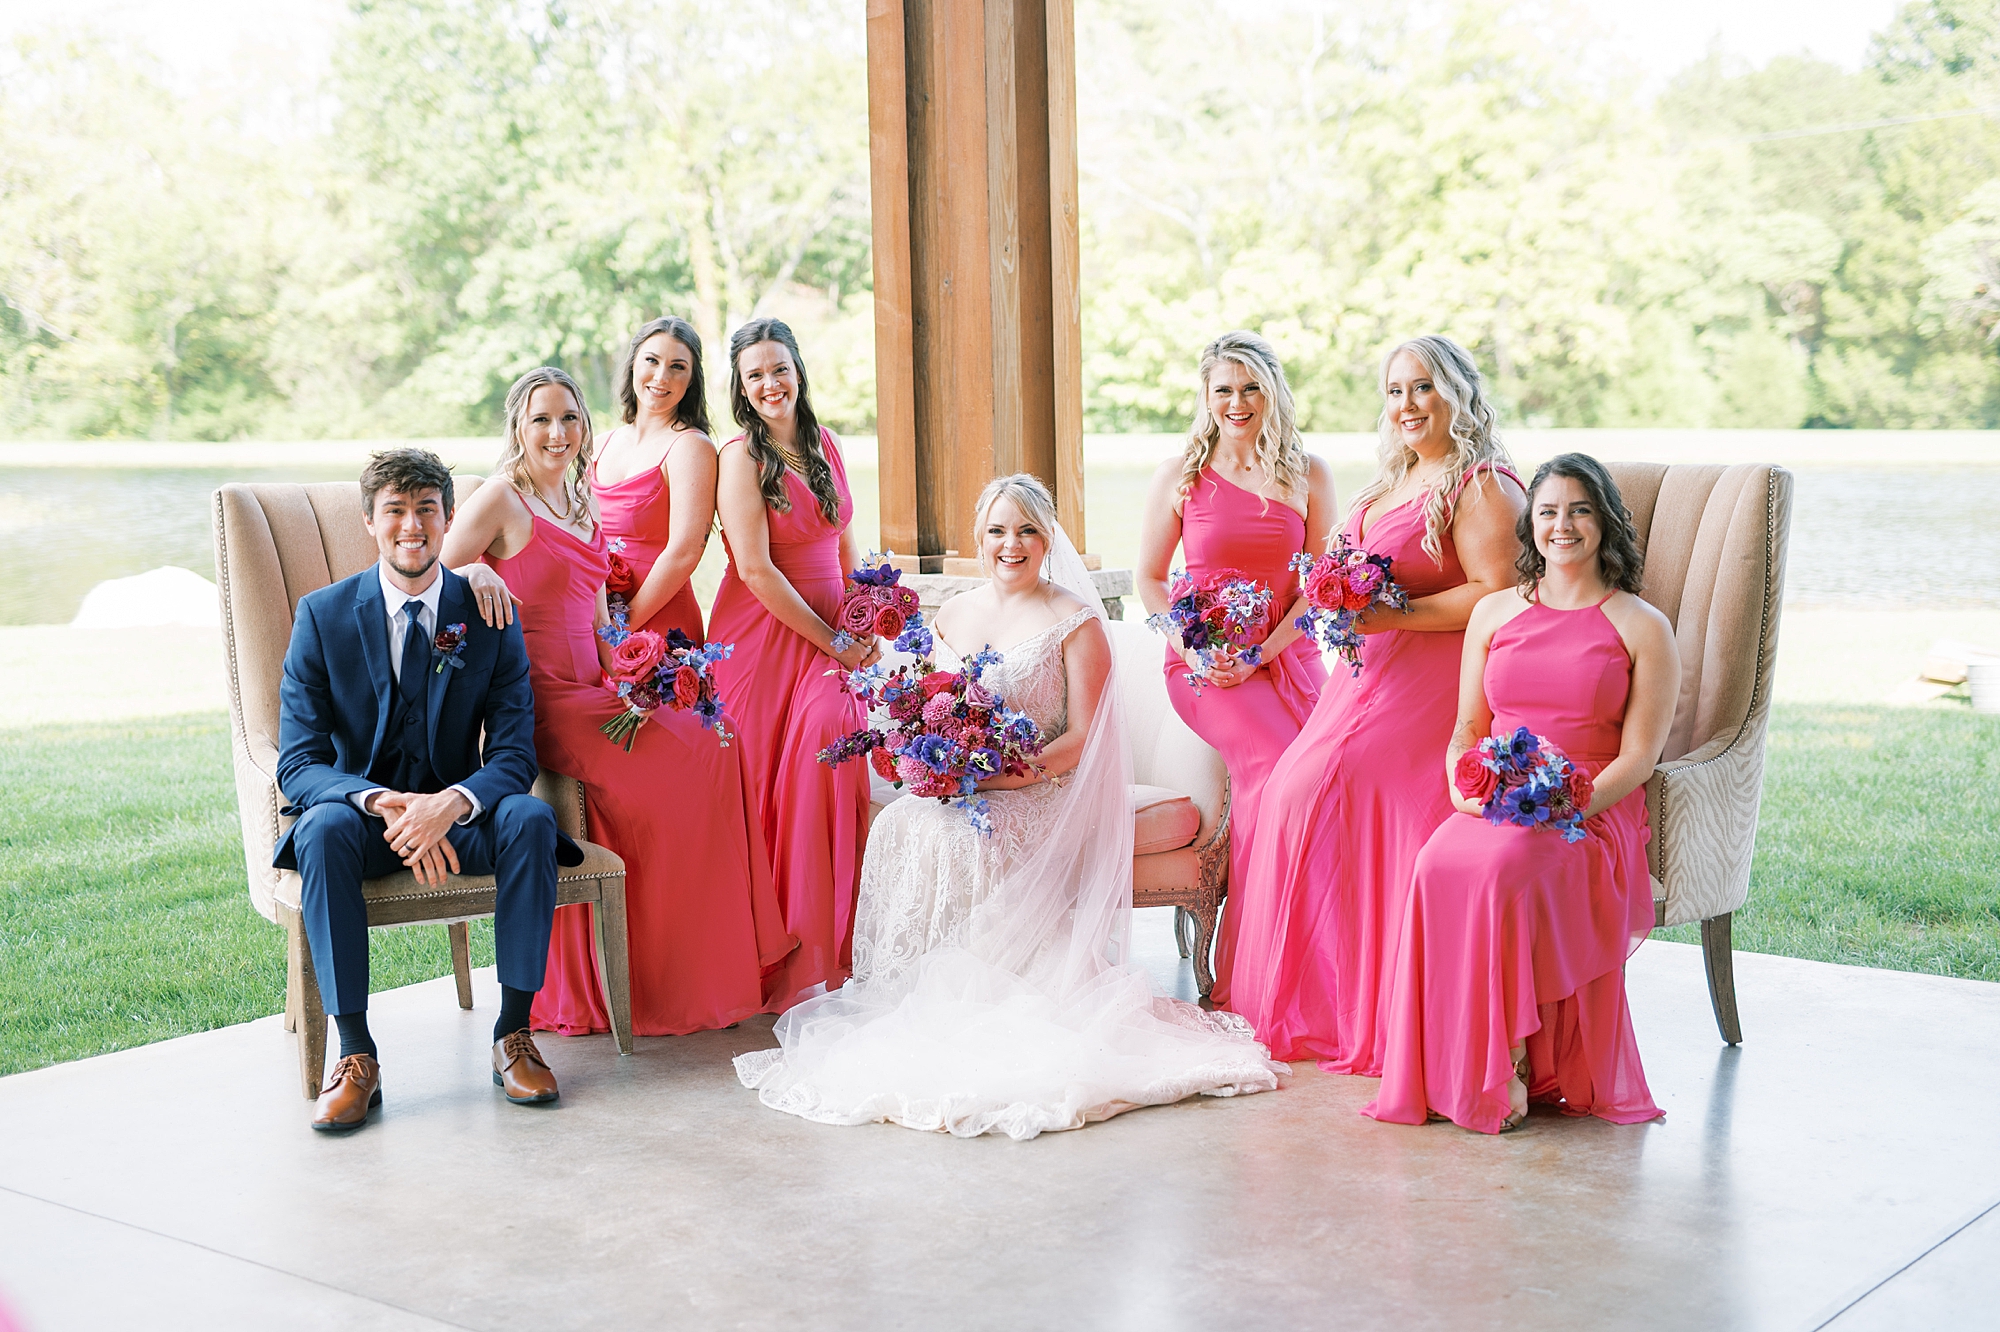 bride with bridal party in pink dresses from Elegant Magenta-Inspired Wedding at The Barn at Sycamore Farms